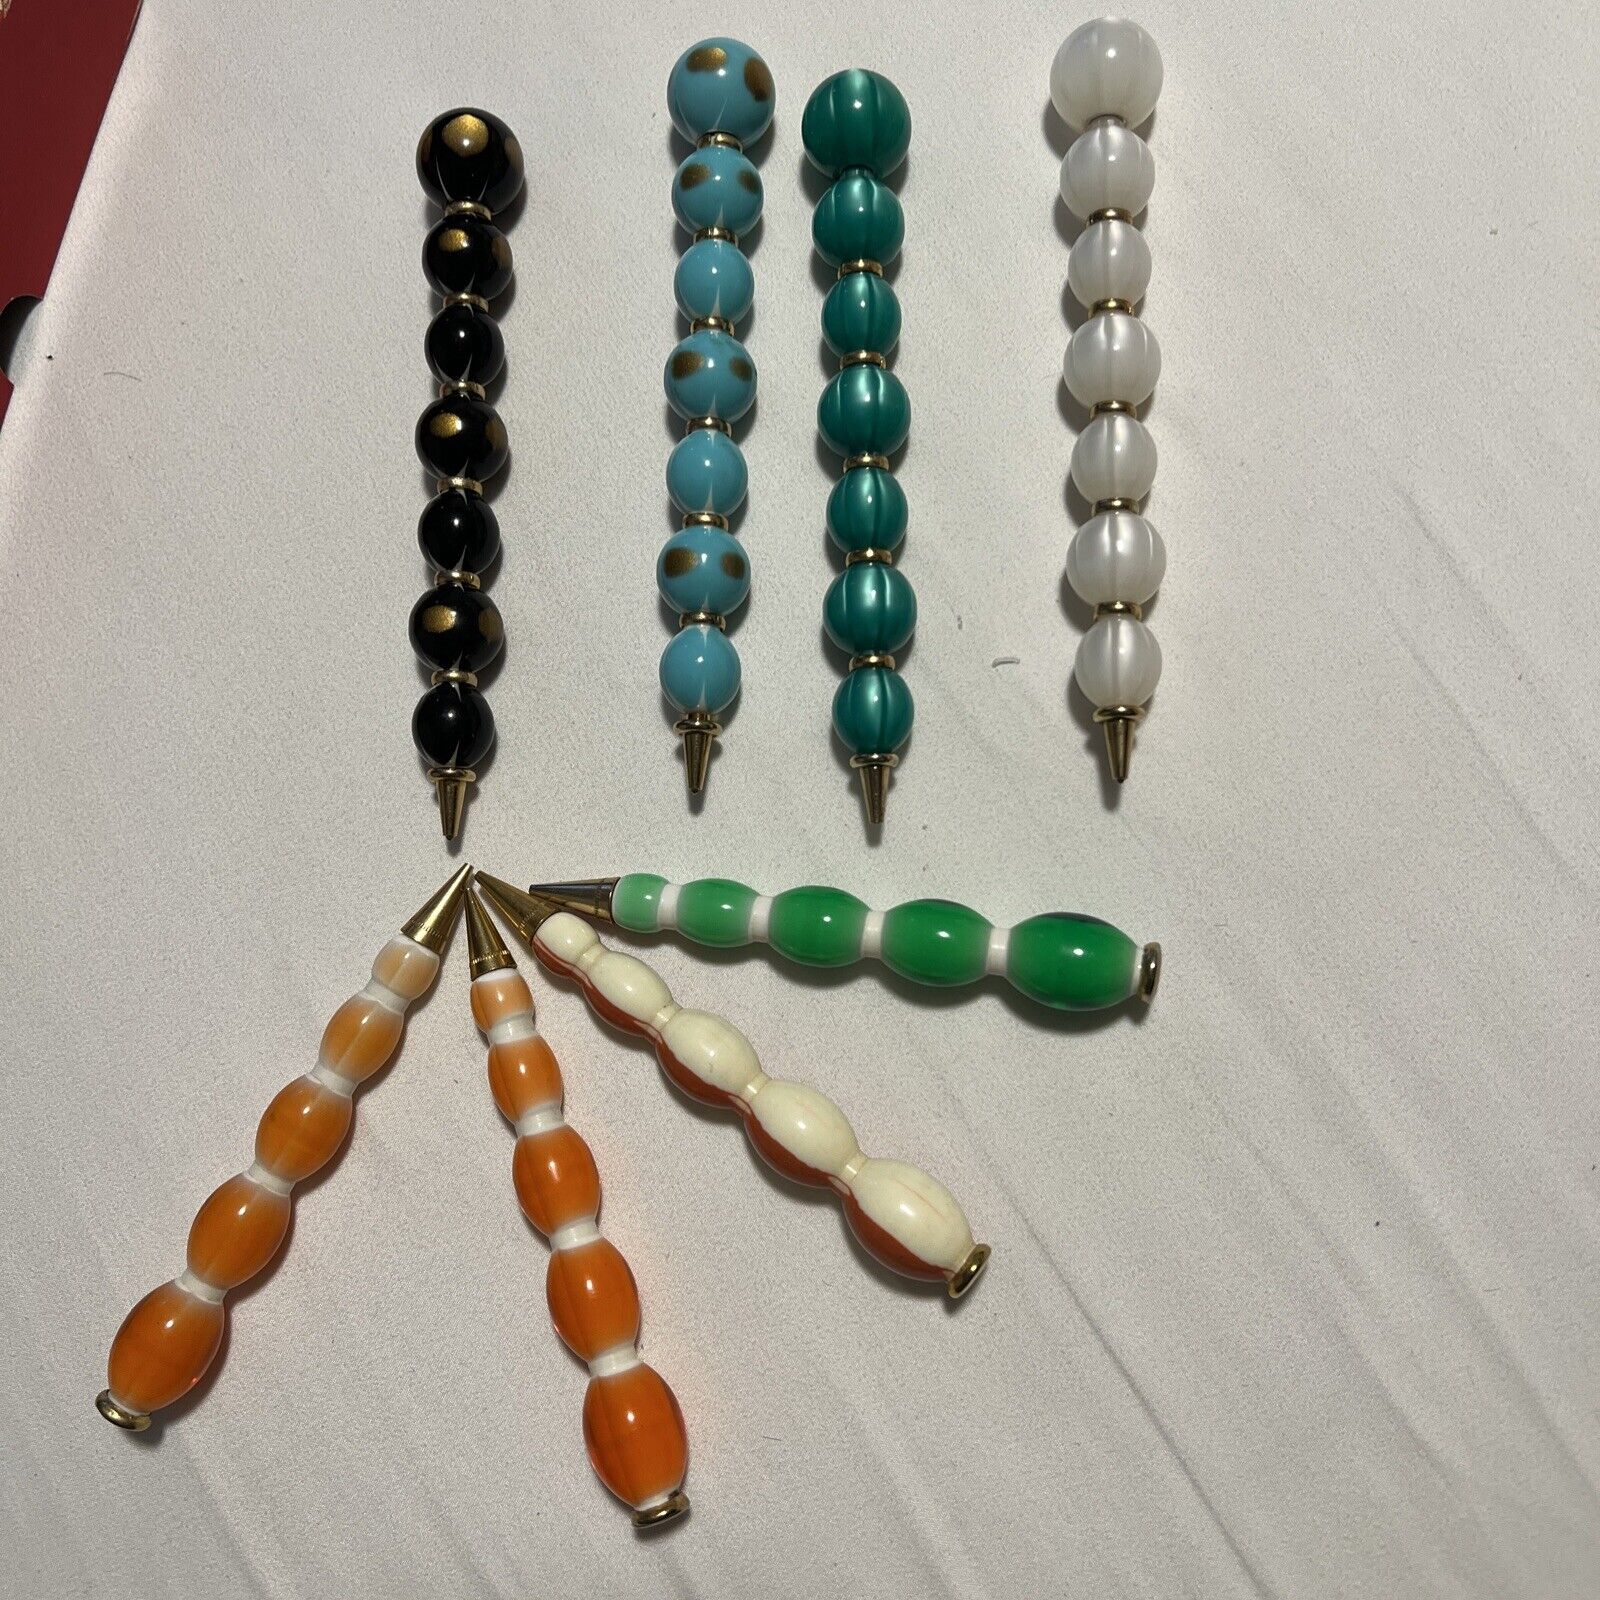 RARE - GORGEOUS HIGH QUALITY HANDMADE BEAD BUBBLE PEARL VINTAGE PENS LOT OF 8